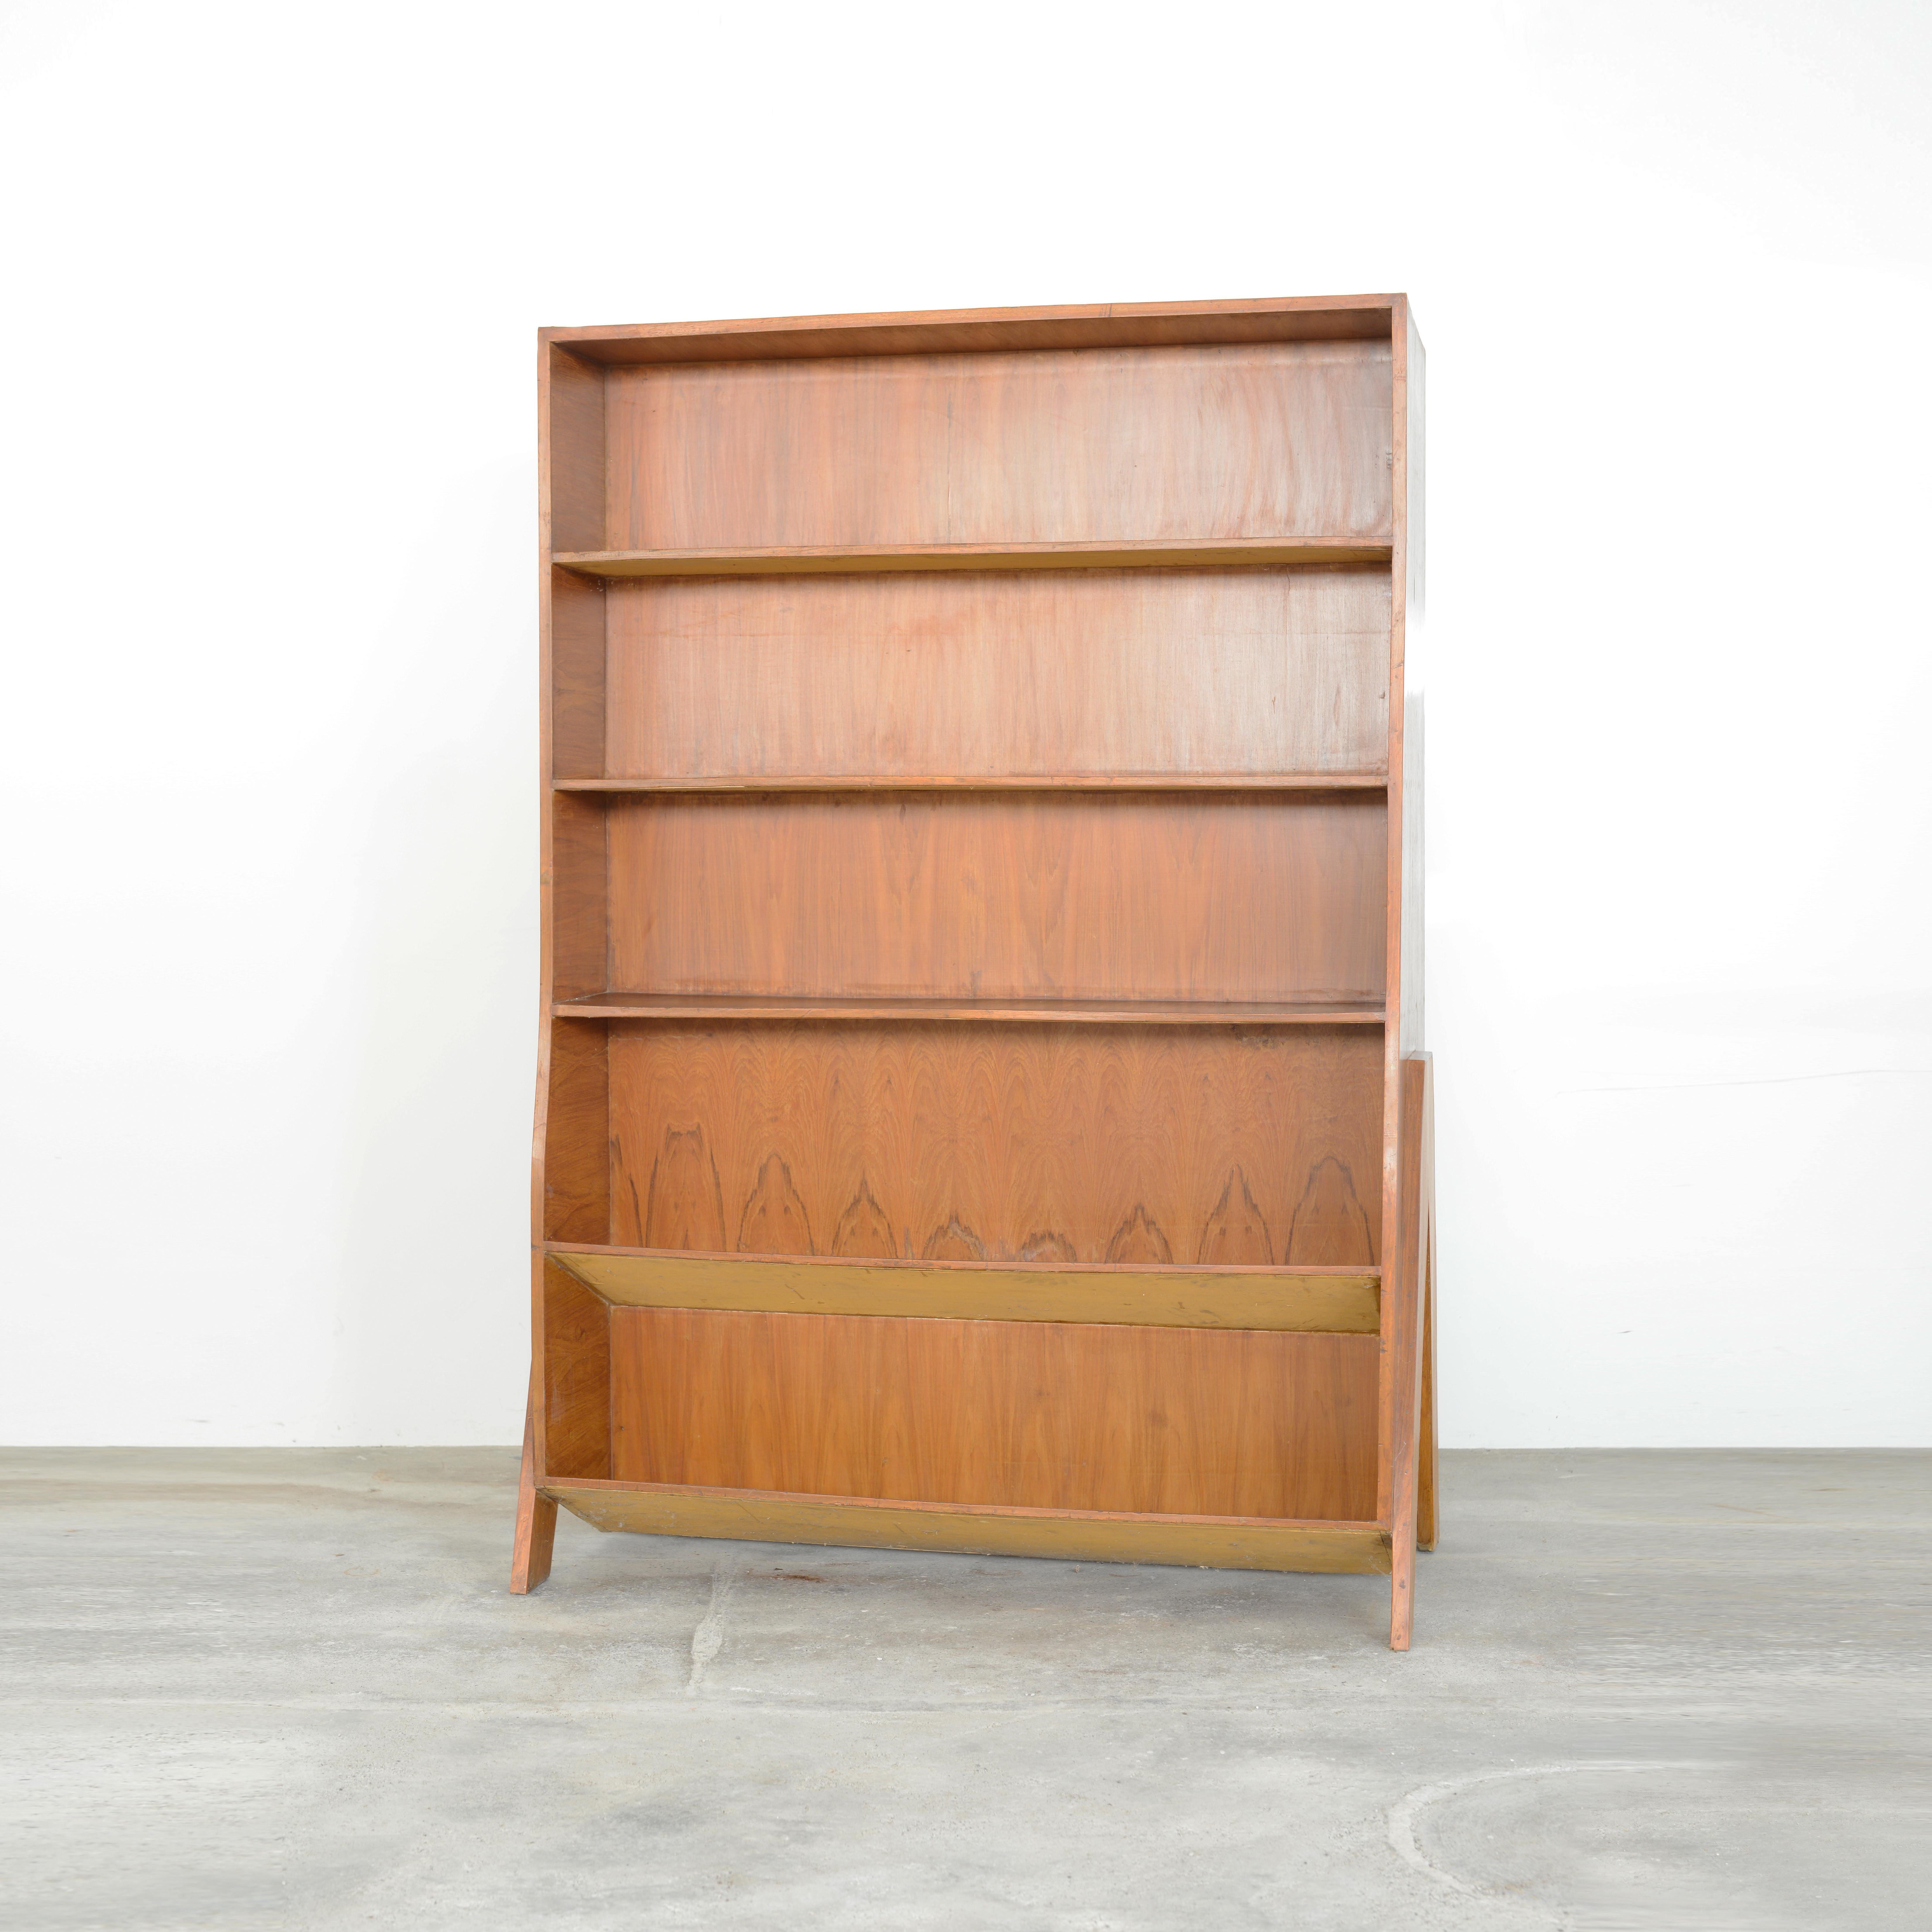 This shelf is a fantastic piece of solid yet elegant furniture. It is raw in its simplicity of construction, its shape becomes reduced to a maximum of functionality. The characteristic legs, combined with the warmth of the solid teak wood make it to